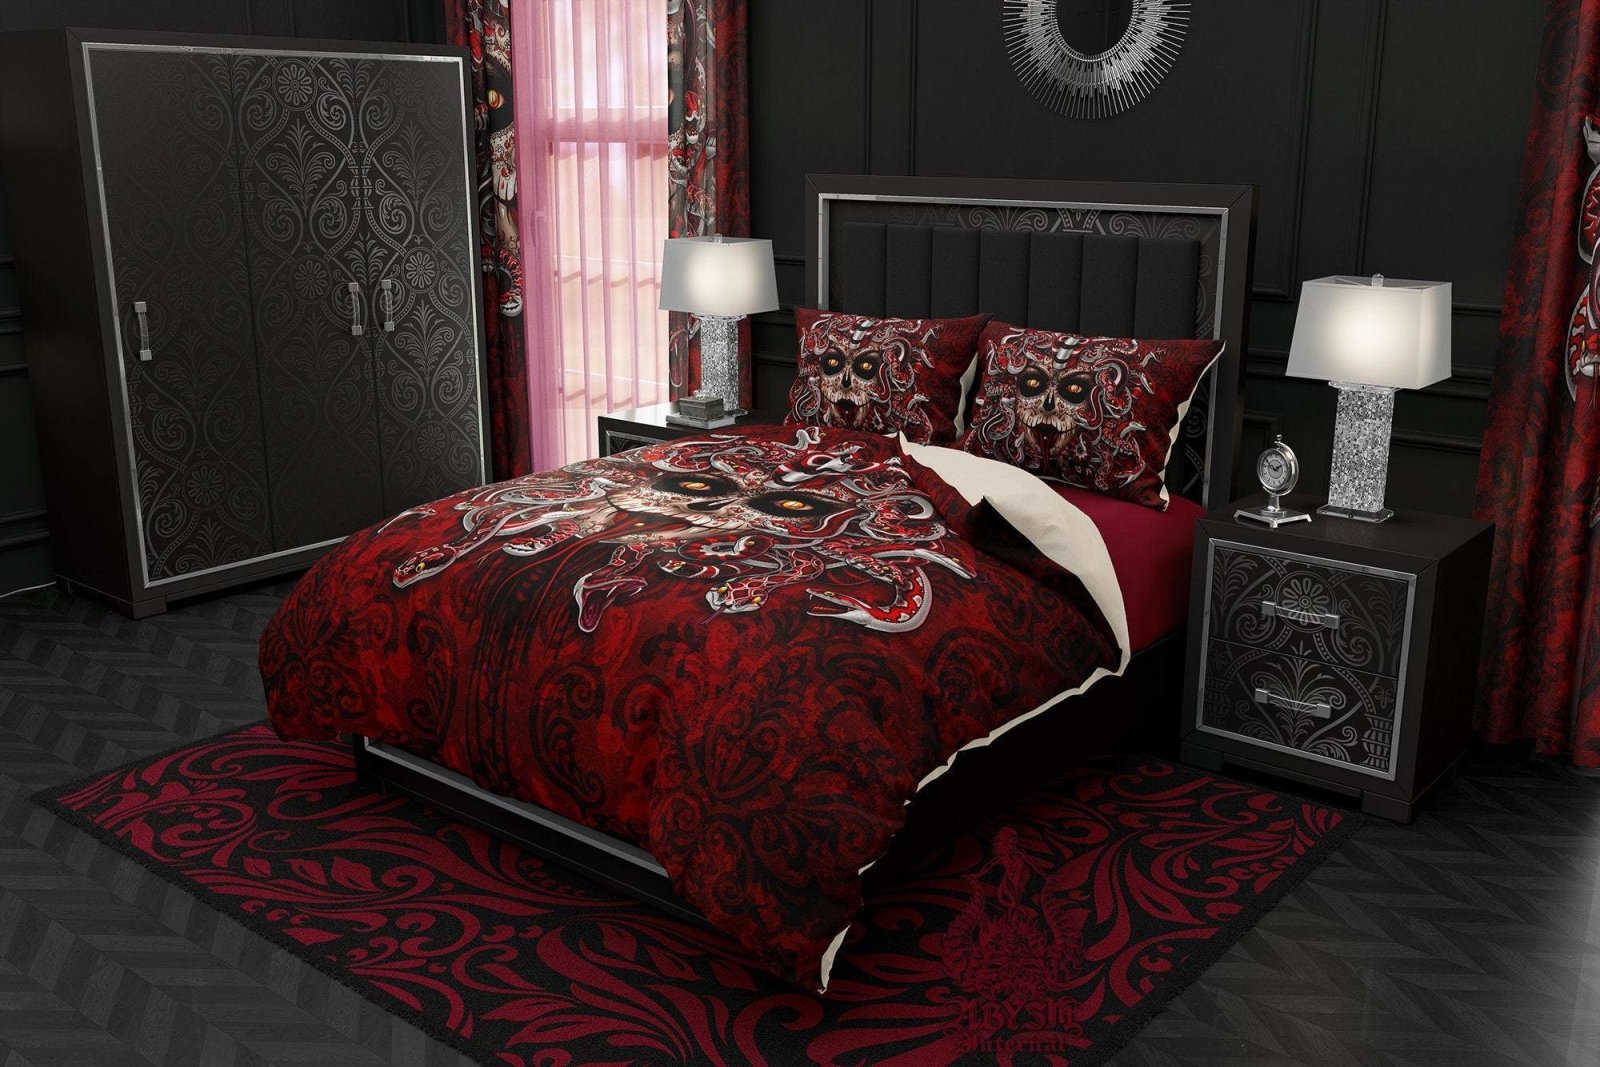 Catrina Bedding Set, Comforter and Duvet, Medusa, Gothic Dia de los Muertos, Goth Bed Cover and Bedroom Decor, King, Queen and Twin Size - Day of the Dead - Abysm Internal